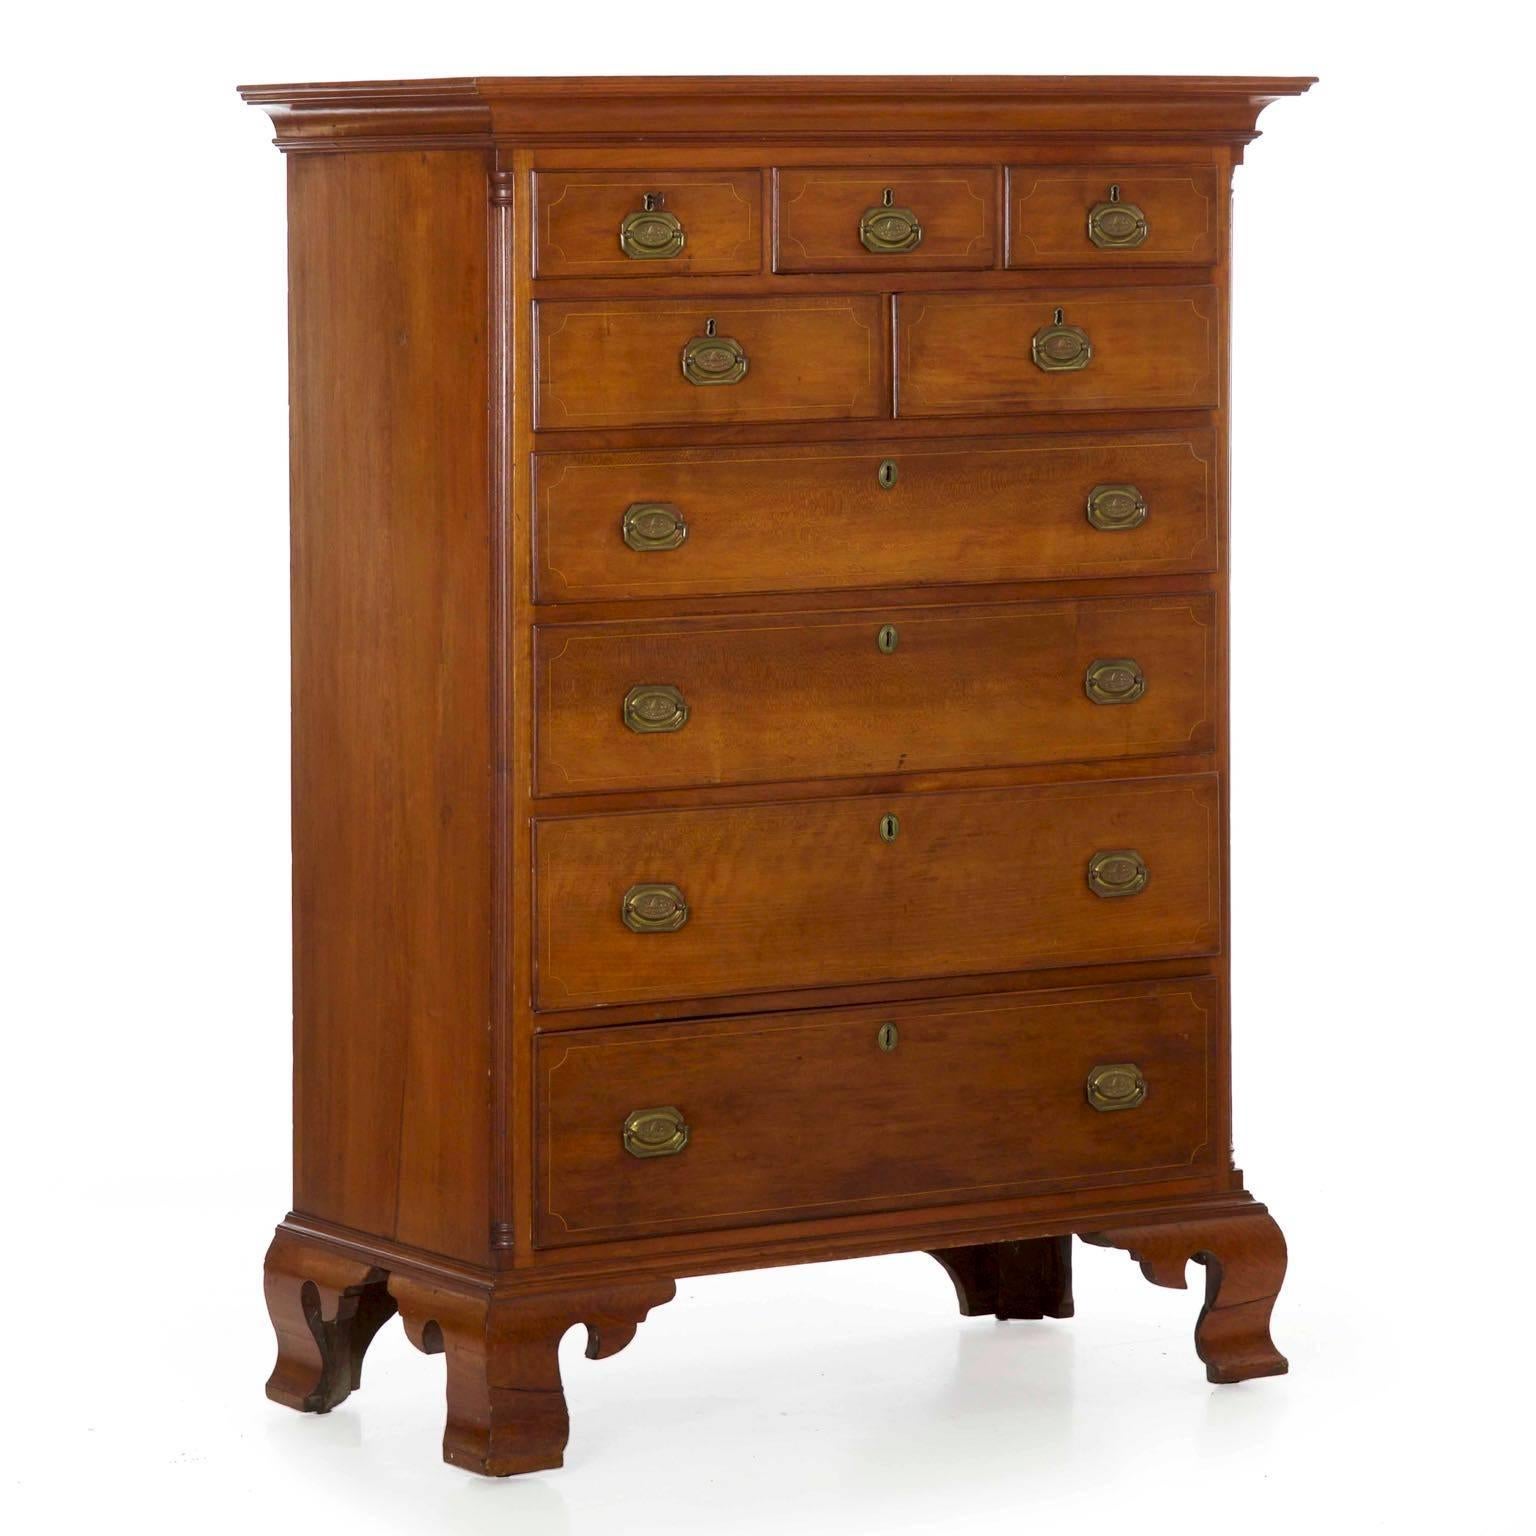 Remaining in excellent original condition, this fine tall chest of drawers shows the transition of styles from the earlier Chippendale tradition into the more edgy and refined Federal style. Notable first in the Hollywood stringer inlays with the